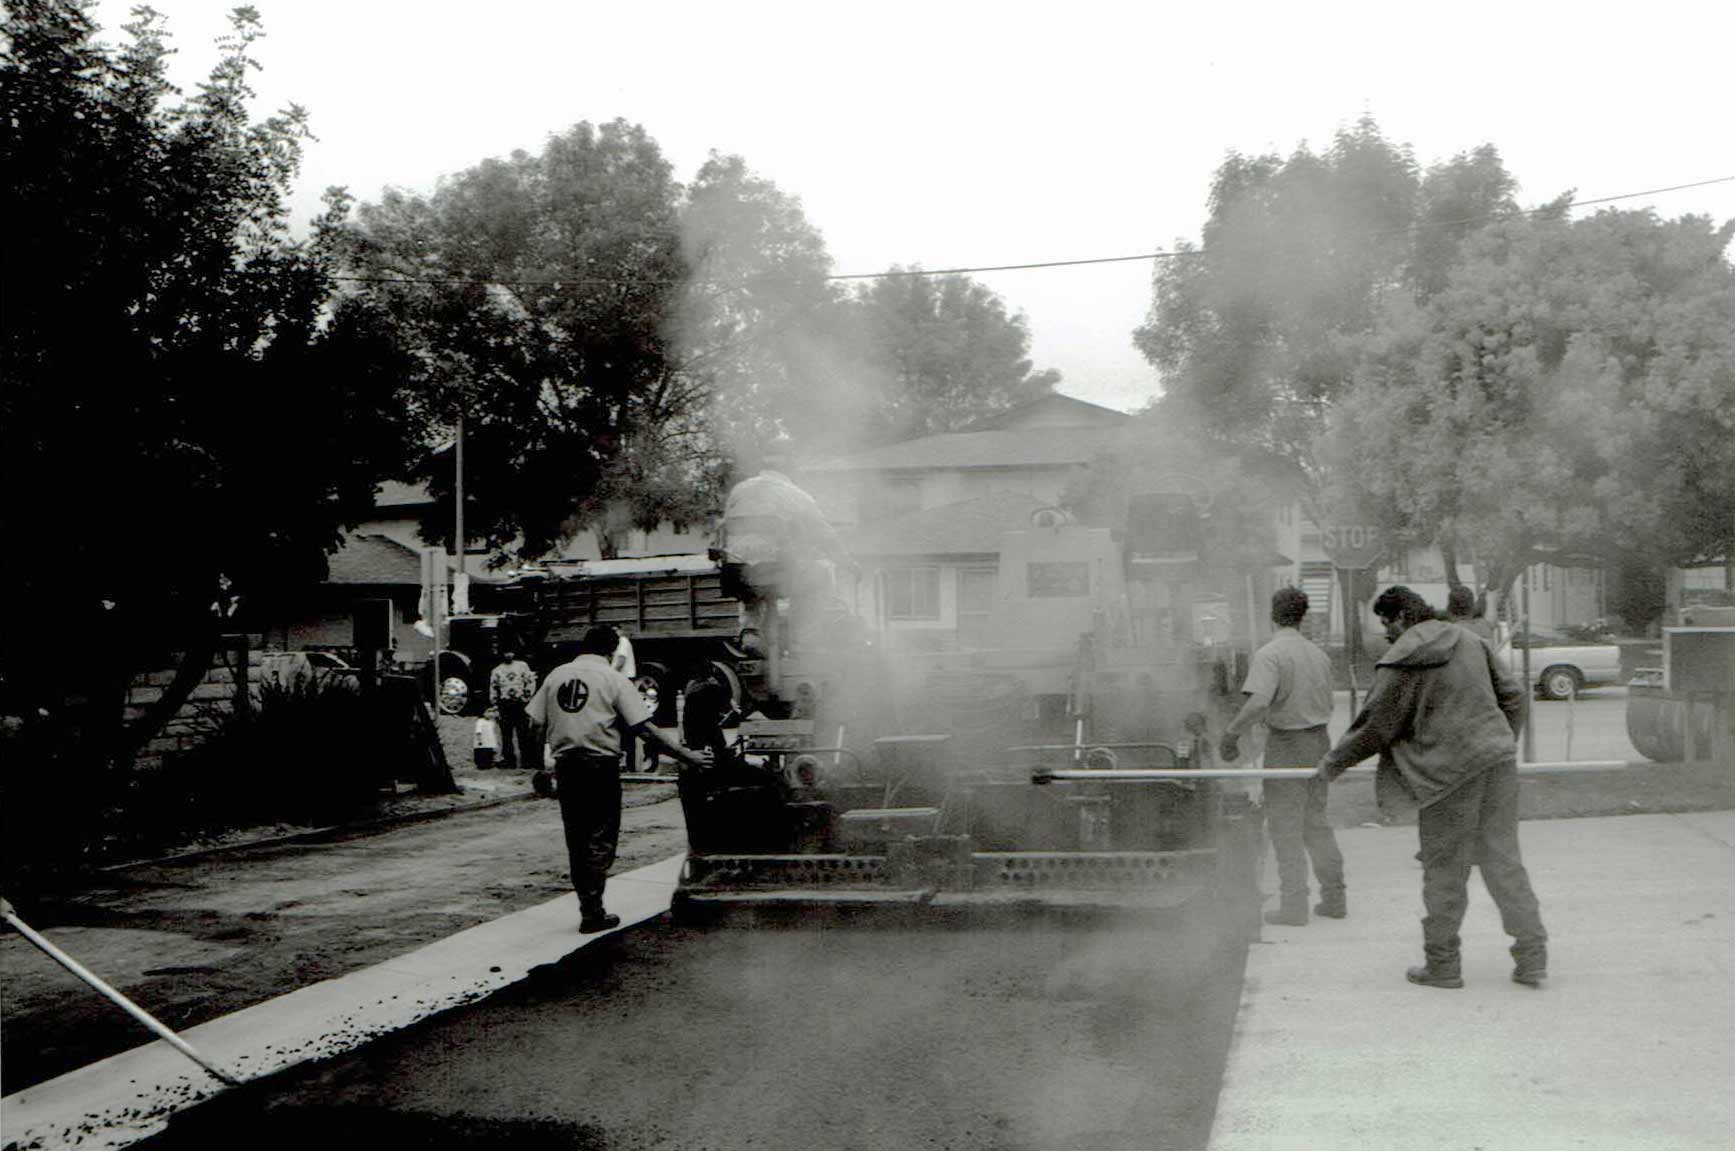 Paving in Newbury Park - Marcos Osuna on a lute, the man who taught Gordon how to rake asphalt. 1